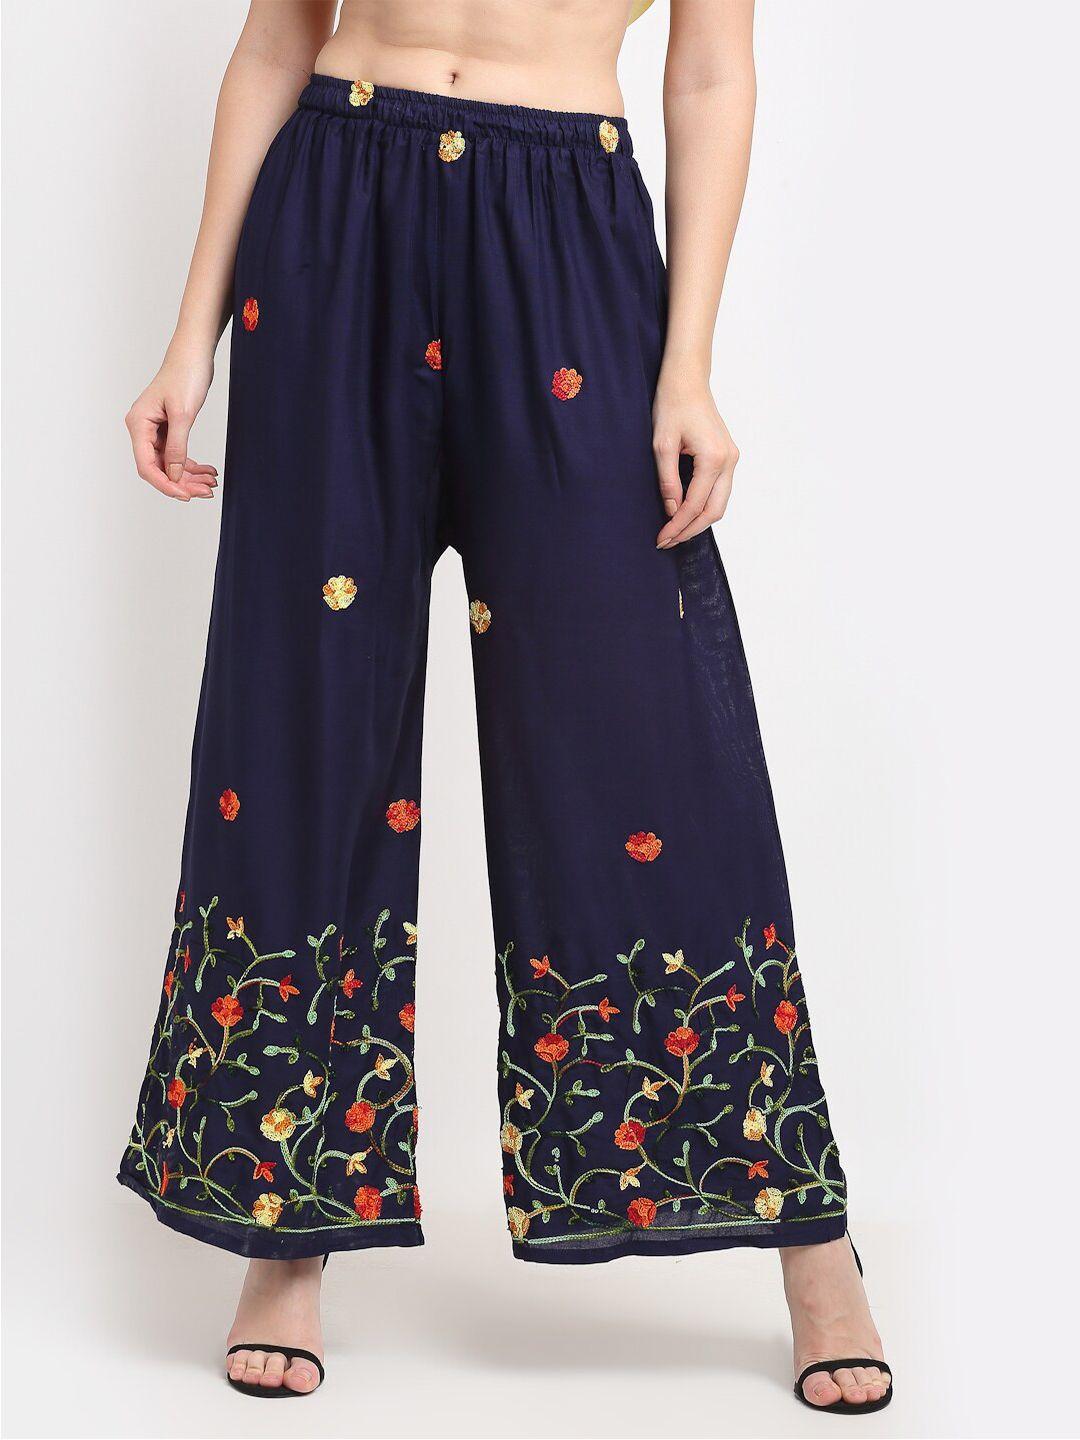 tag 7 women navy blue & red floral embroidered flared ethnic palazzos